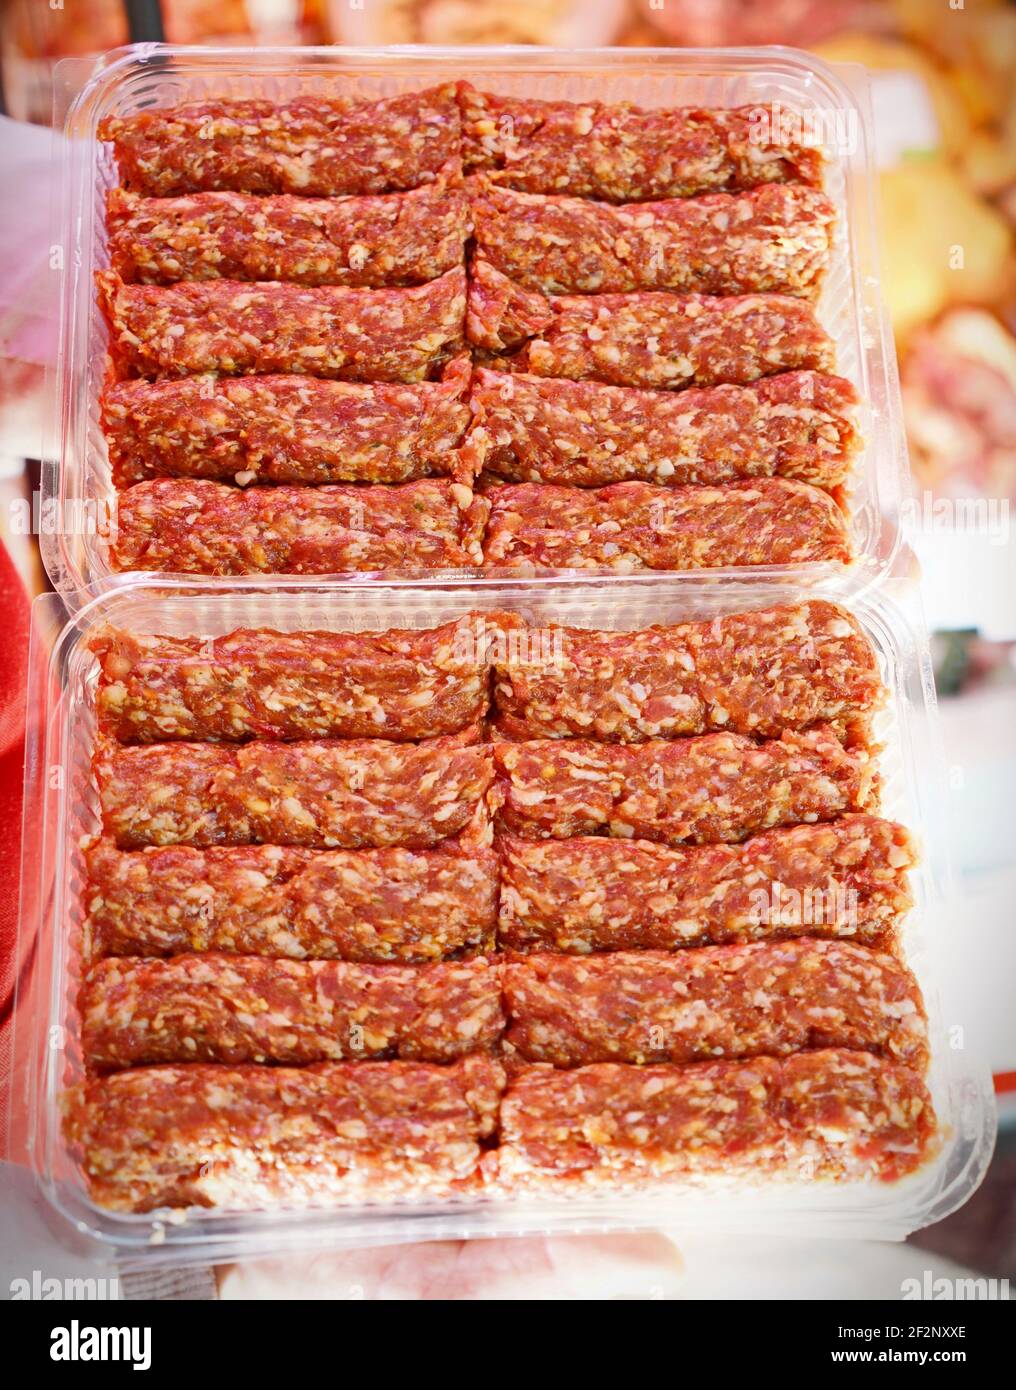 Romanian uncooked meat rolls called mititei, mici - close-up. Romanian traditional food Stock Photo